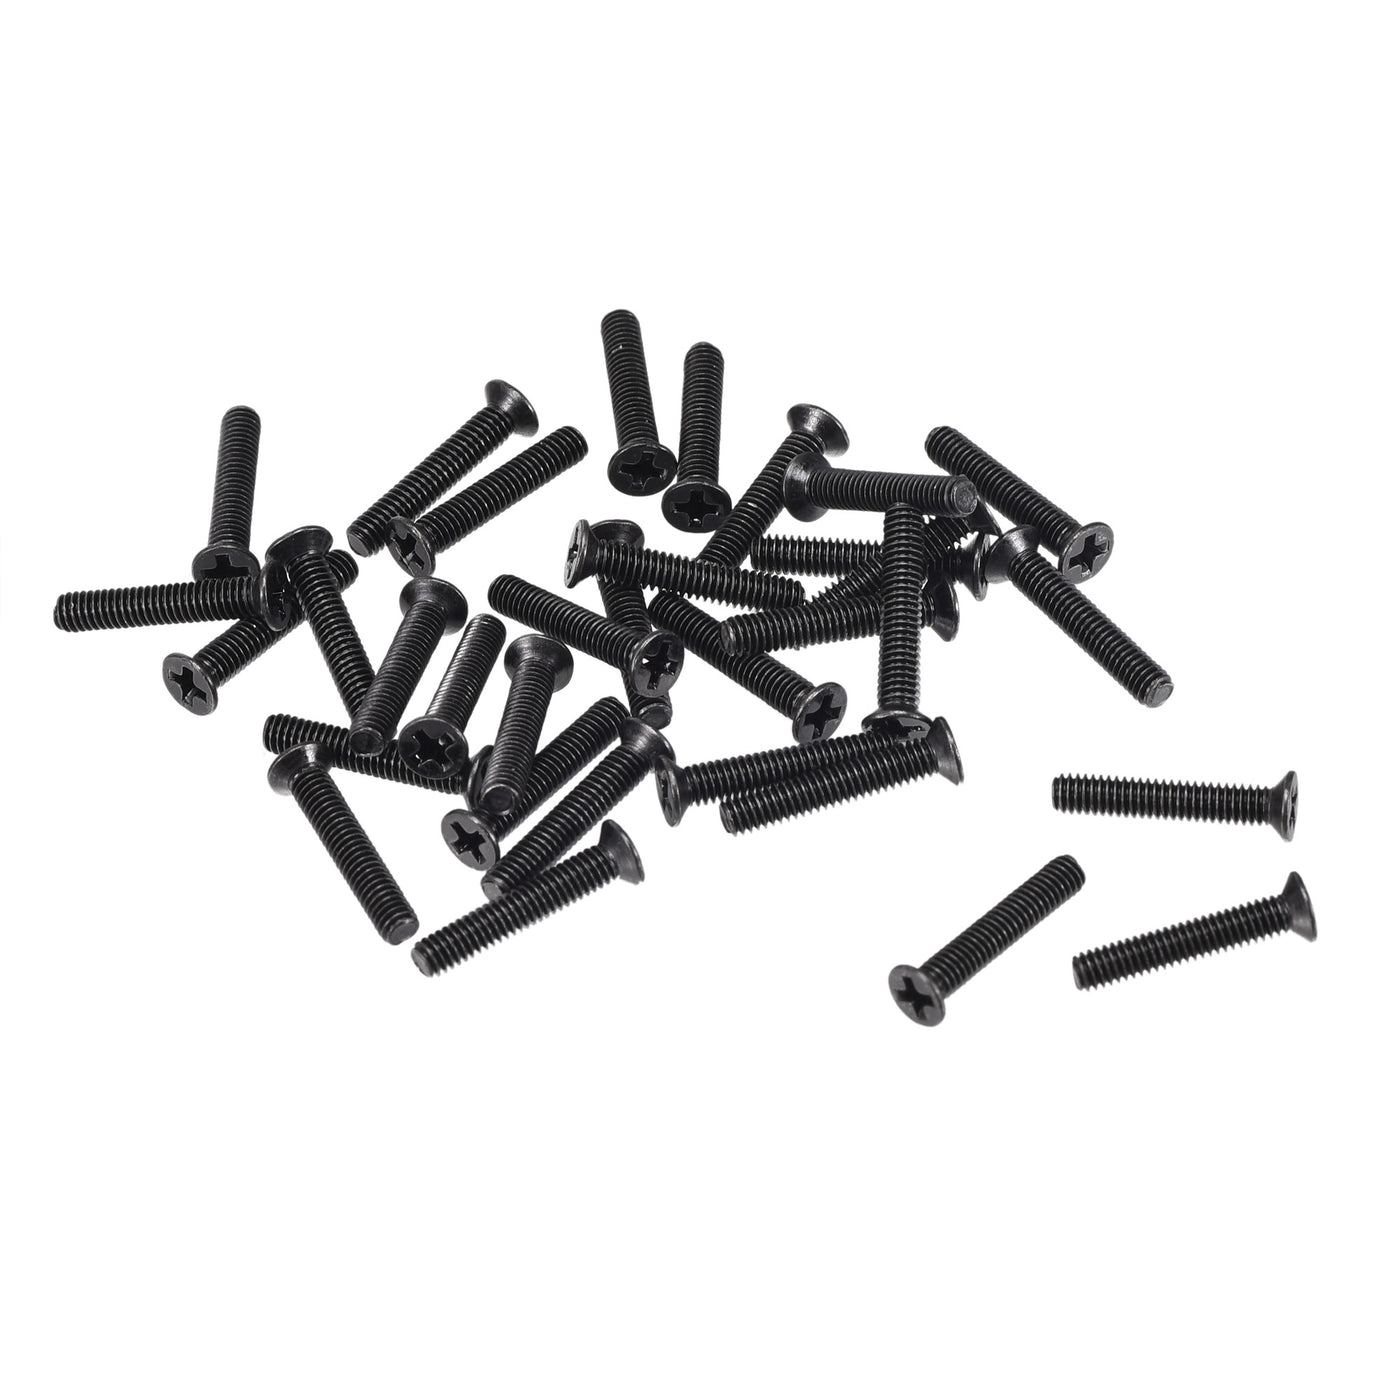 uxcell Uxcell M2.5 x 14mm Phillips Flat Head Screws Carbon Steel Machine Screws Black for Home Office Computer Case Appliance Equipment 350pcs